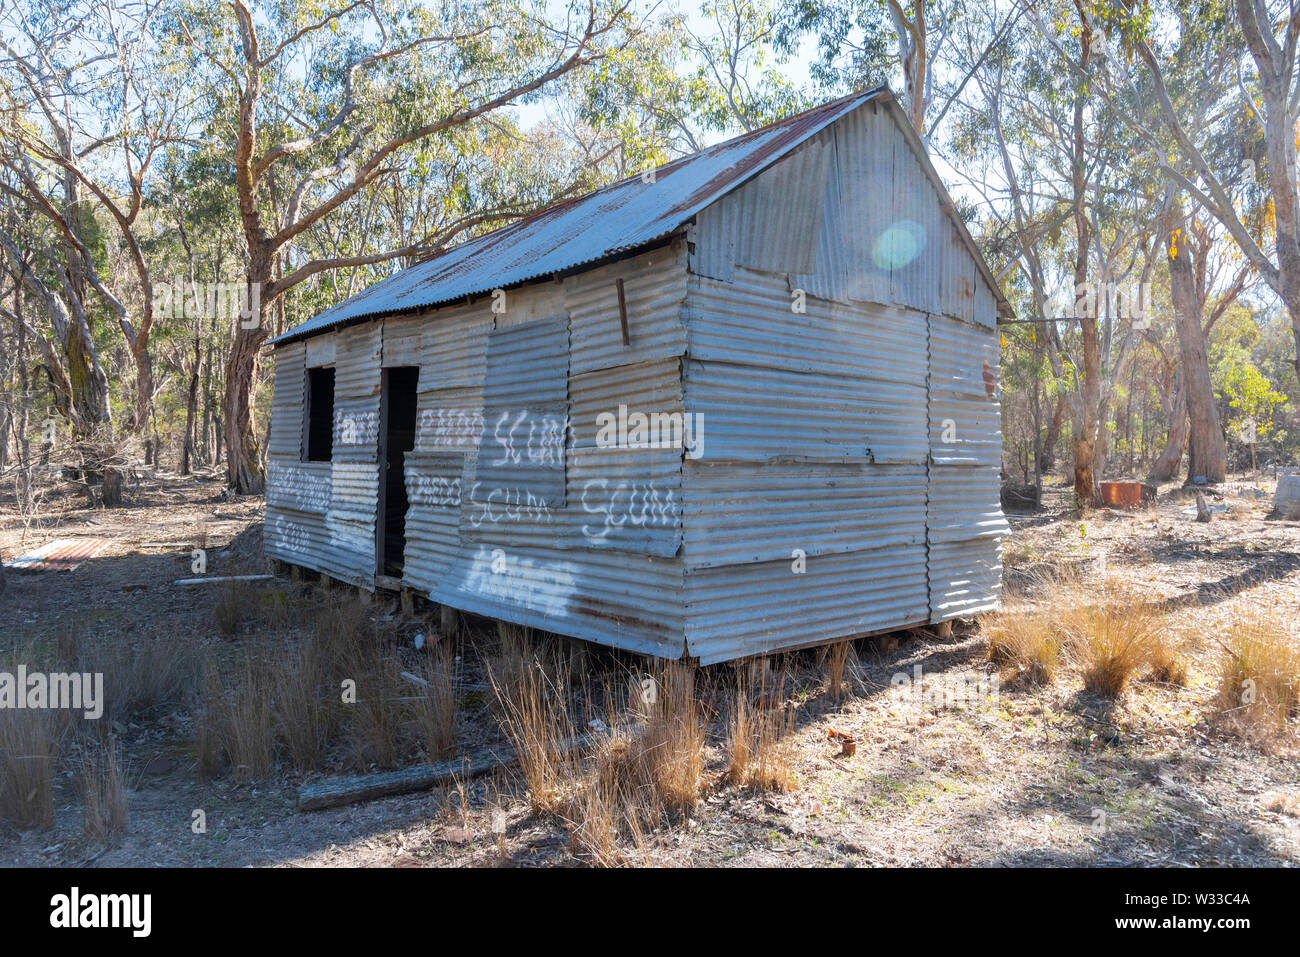 old derelict house outside Emmaville in northern new south wales, australia, with graffiti complaining about child abuse by an unknown old priest Stock Photo